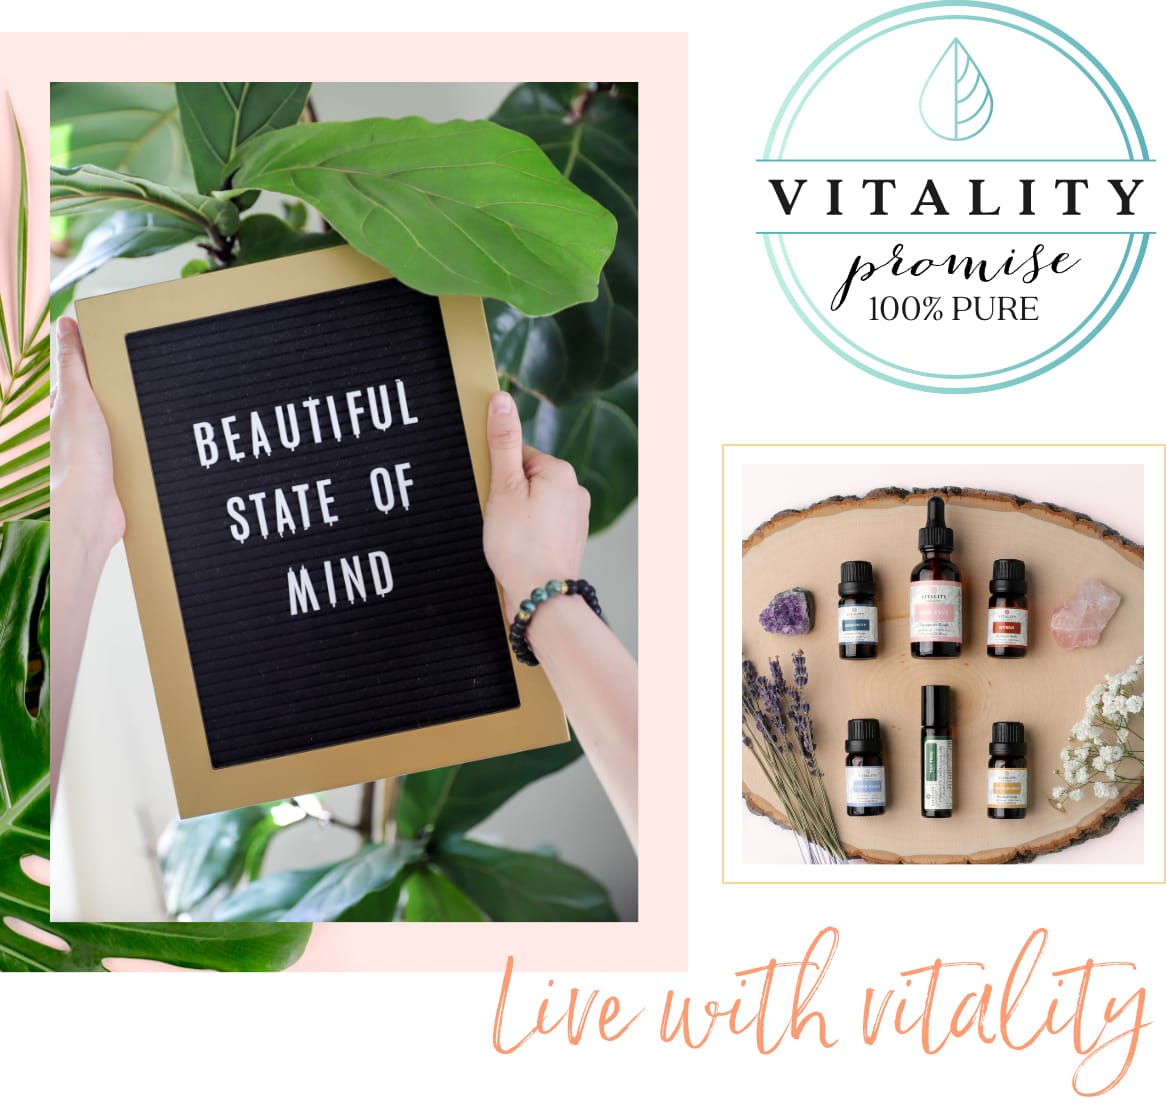 Nutmeg Vitality™ by Young Living